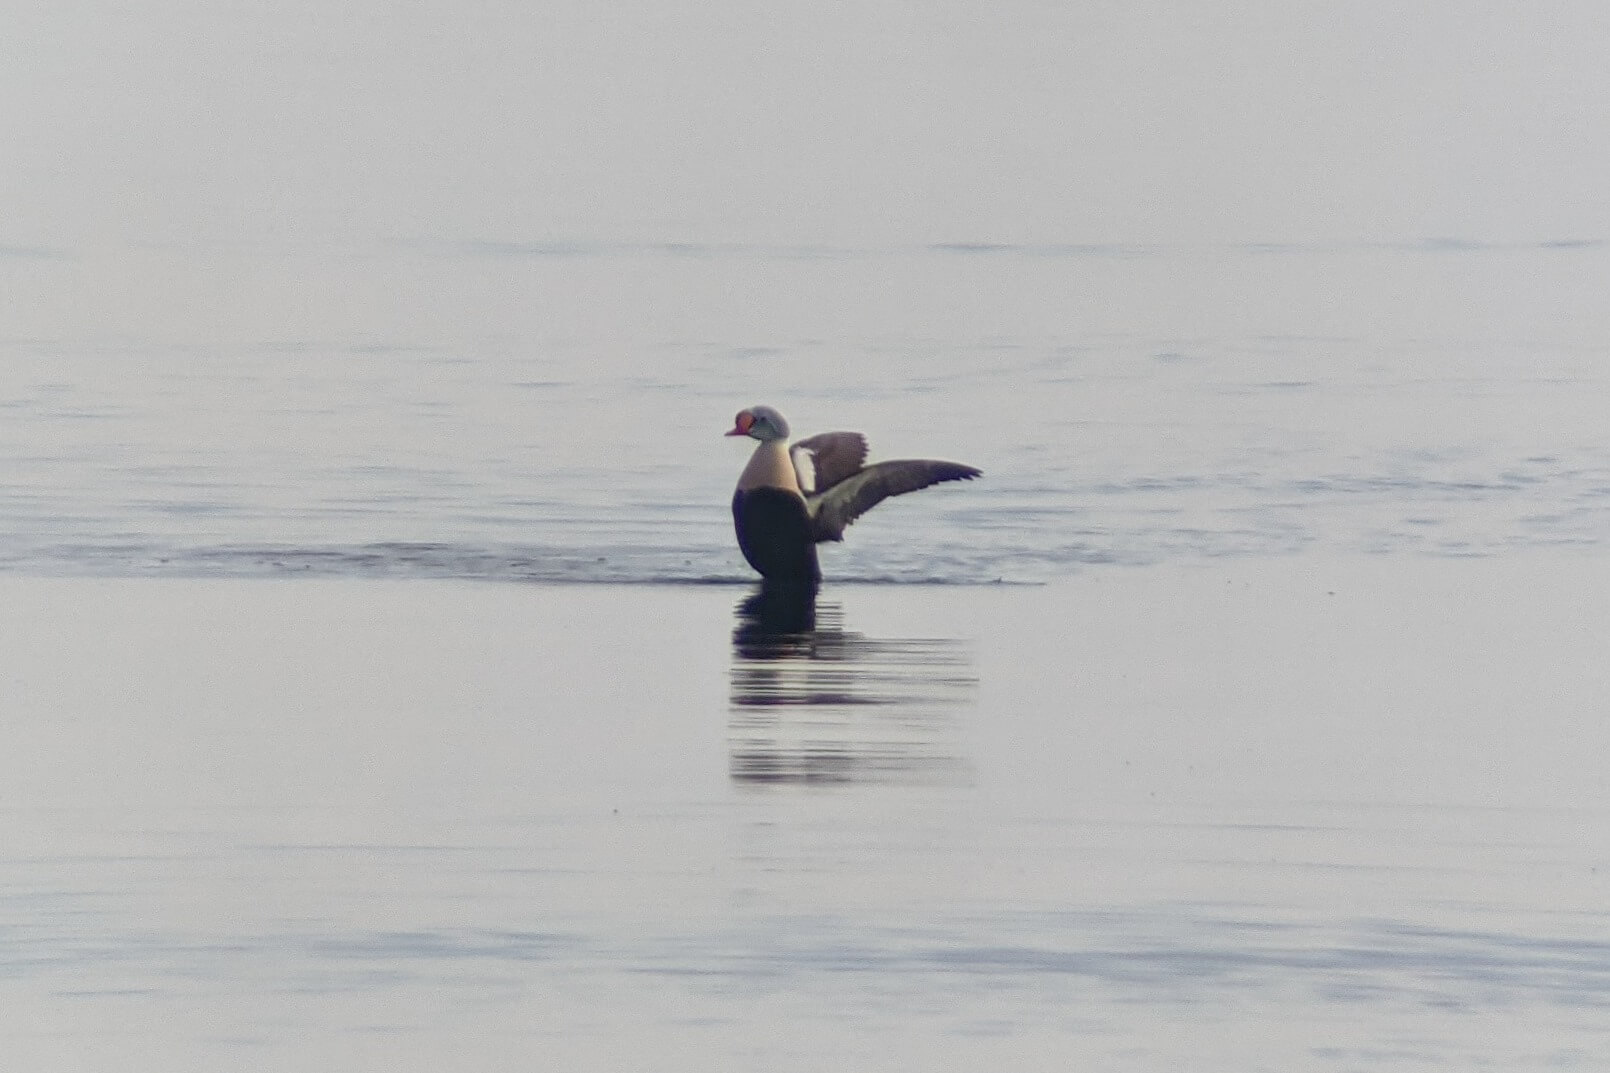 A king eider on the water.